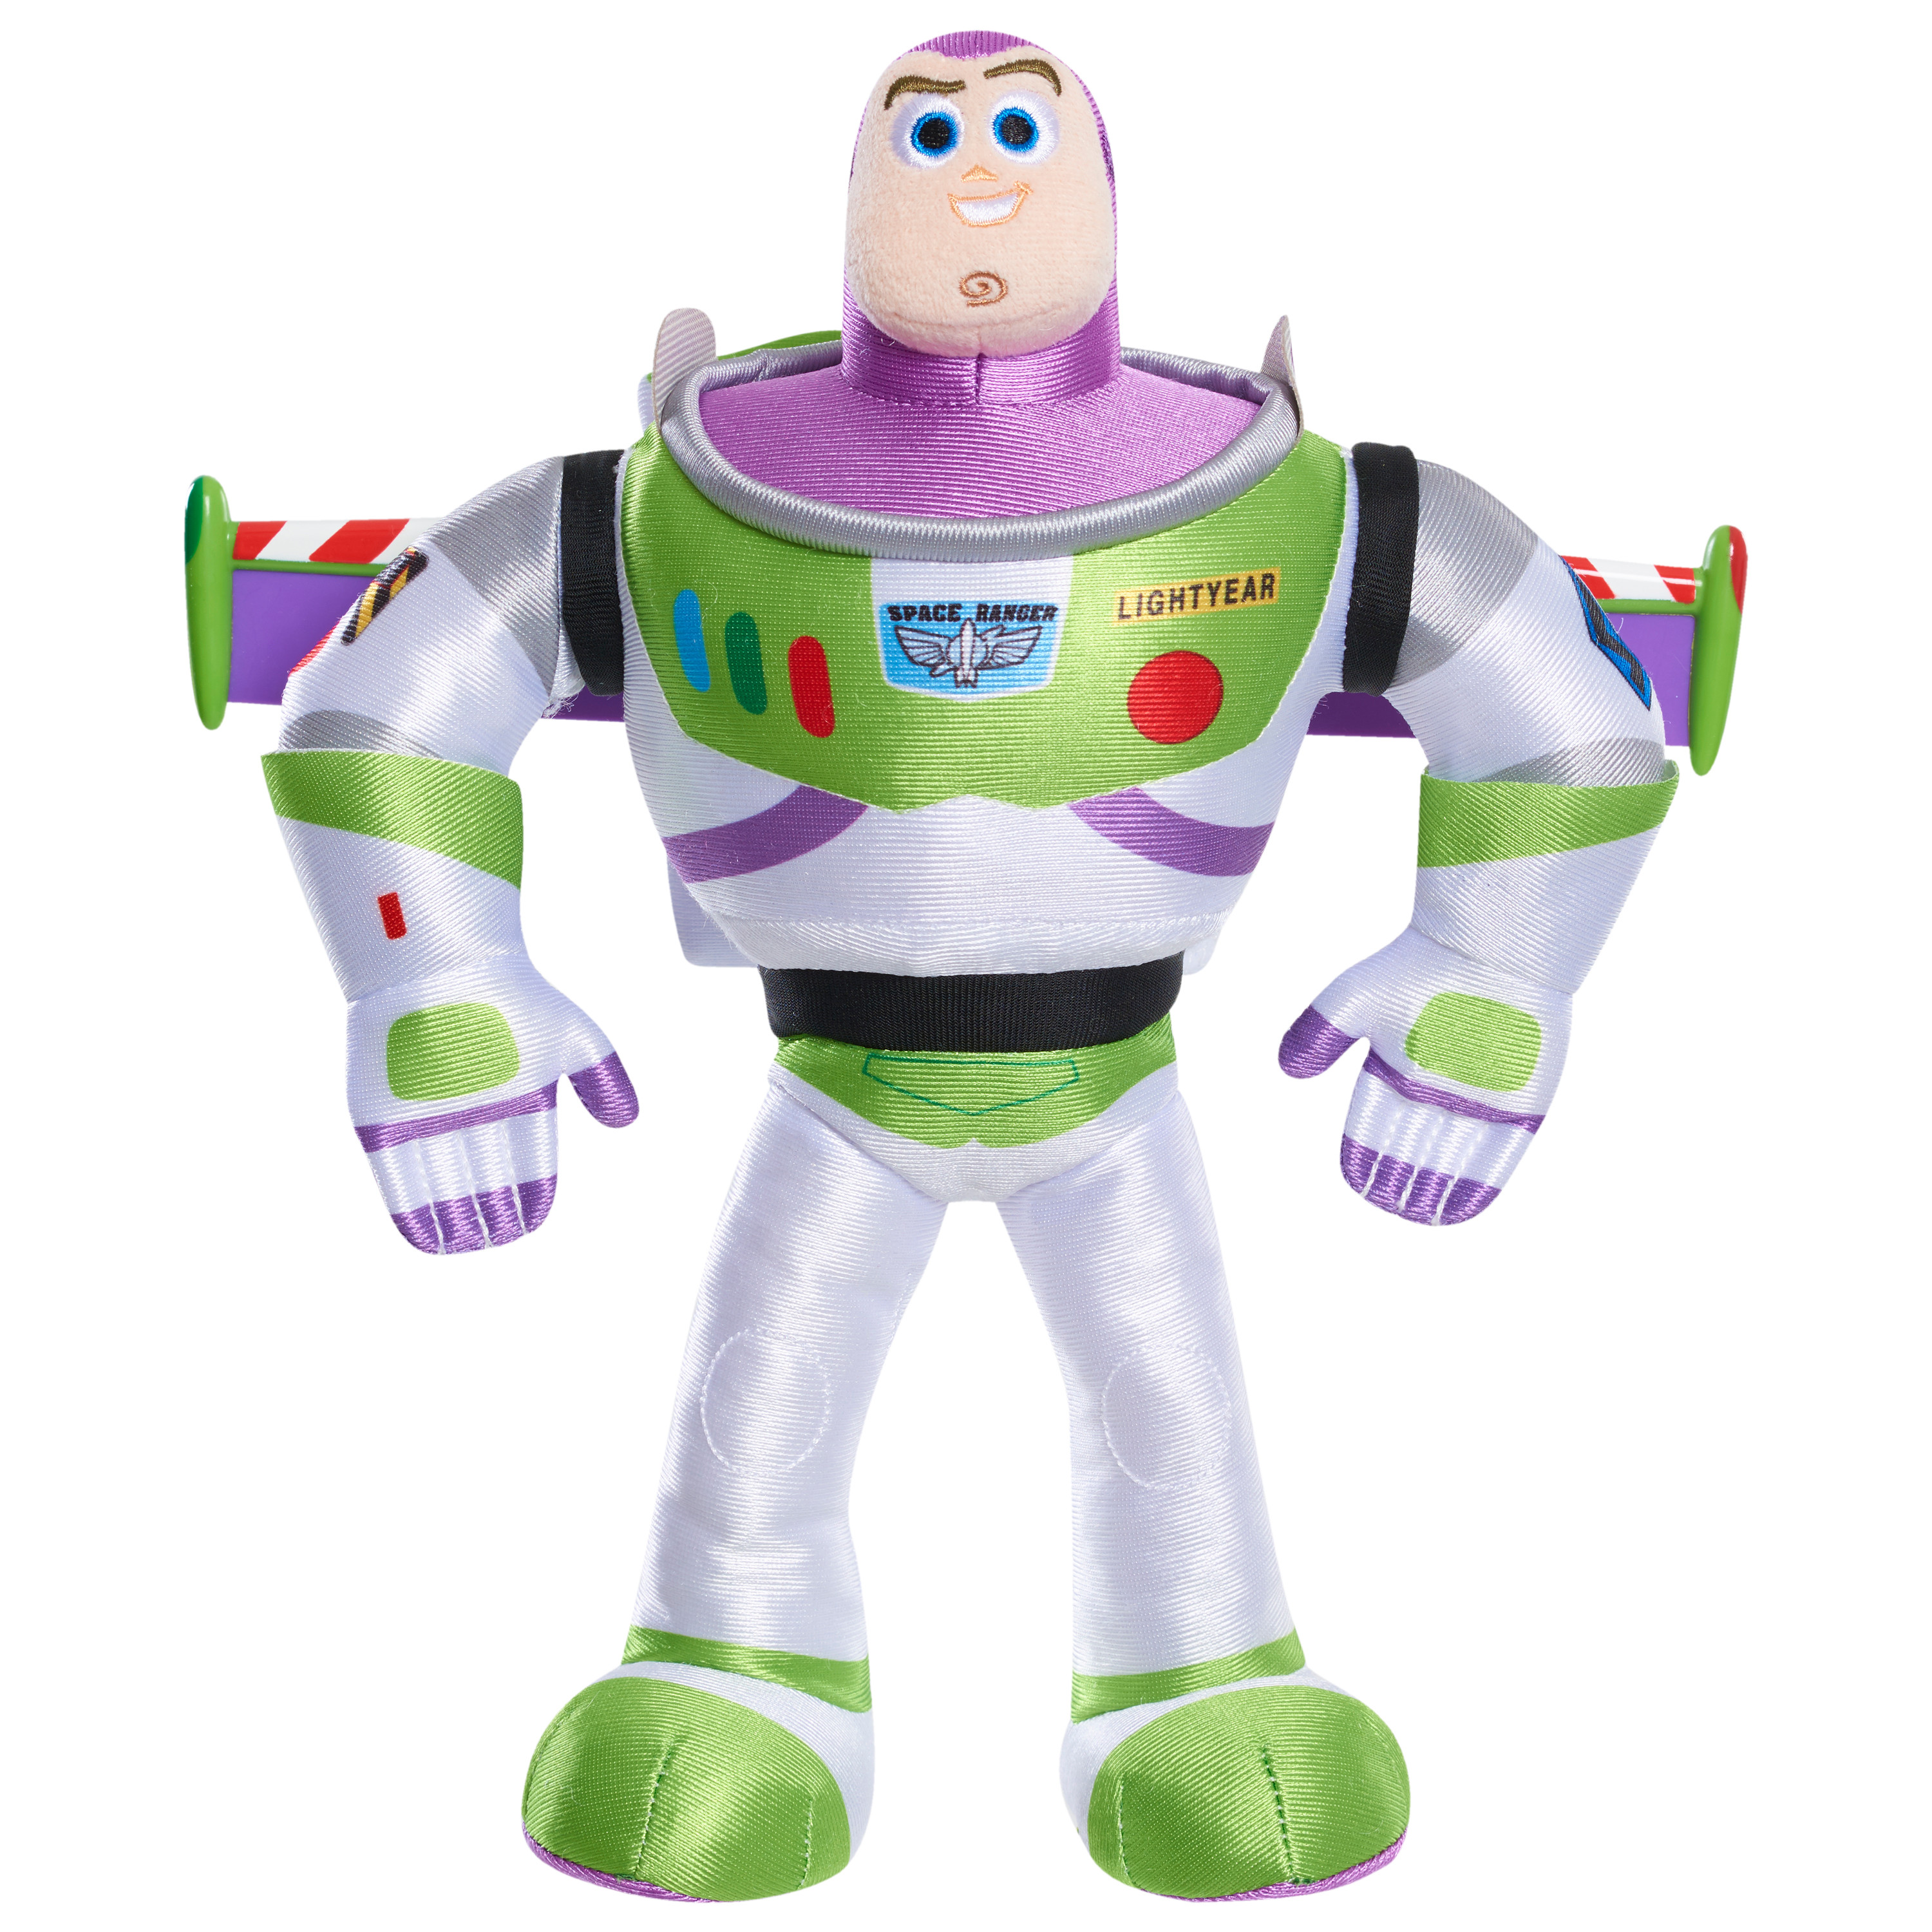 Disney•Pixar's Toy Story 4  High-Flying Buzz Lightyear Feature Plush, Officially Licensed Kids Toys for Ages 3 Up, Gifts and Presents - image 1 of 2